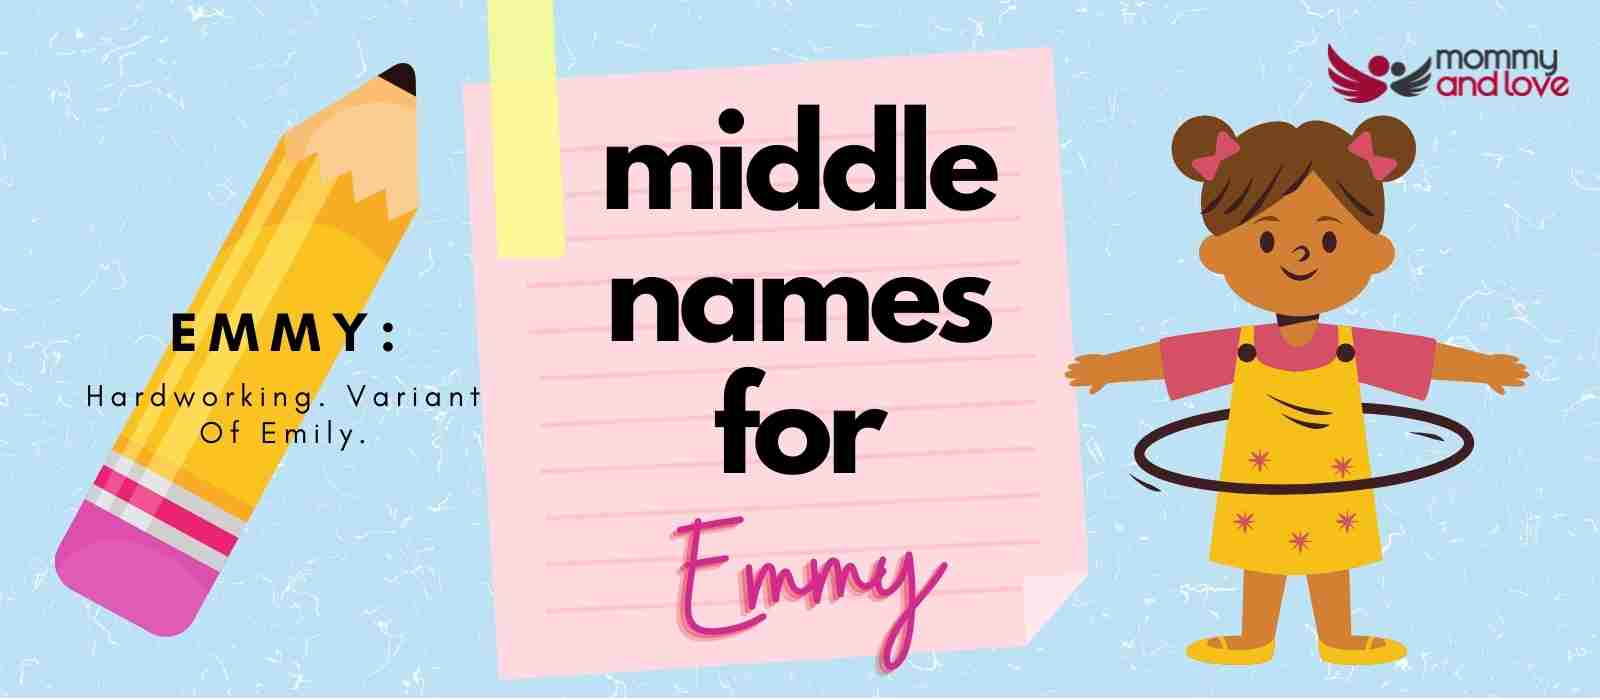 Middle Names for Emmy